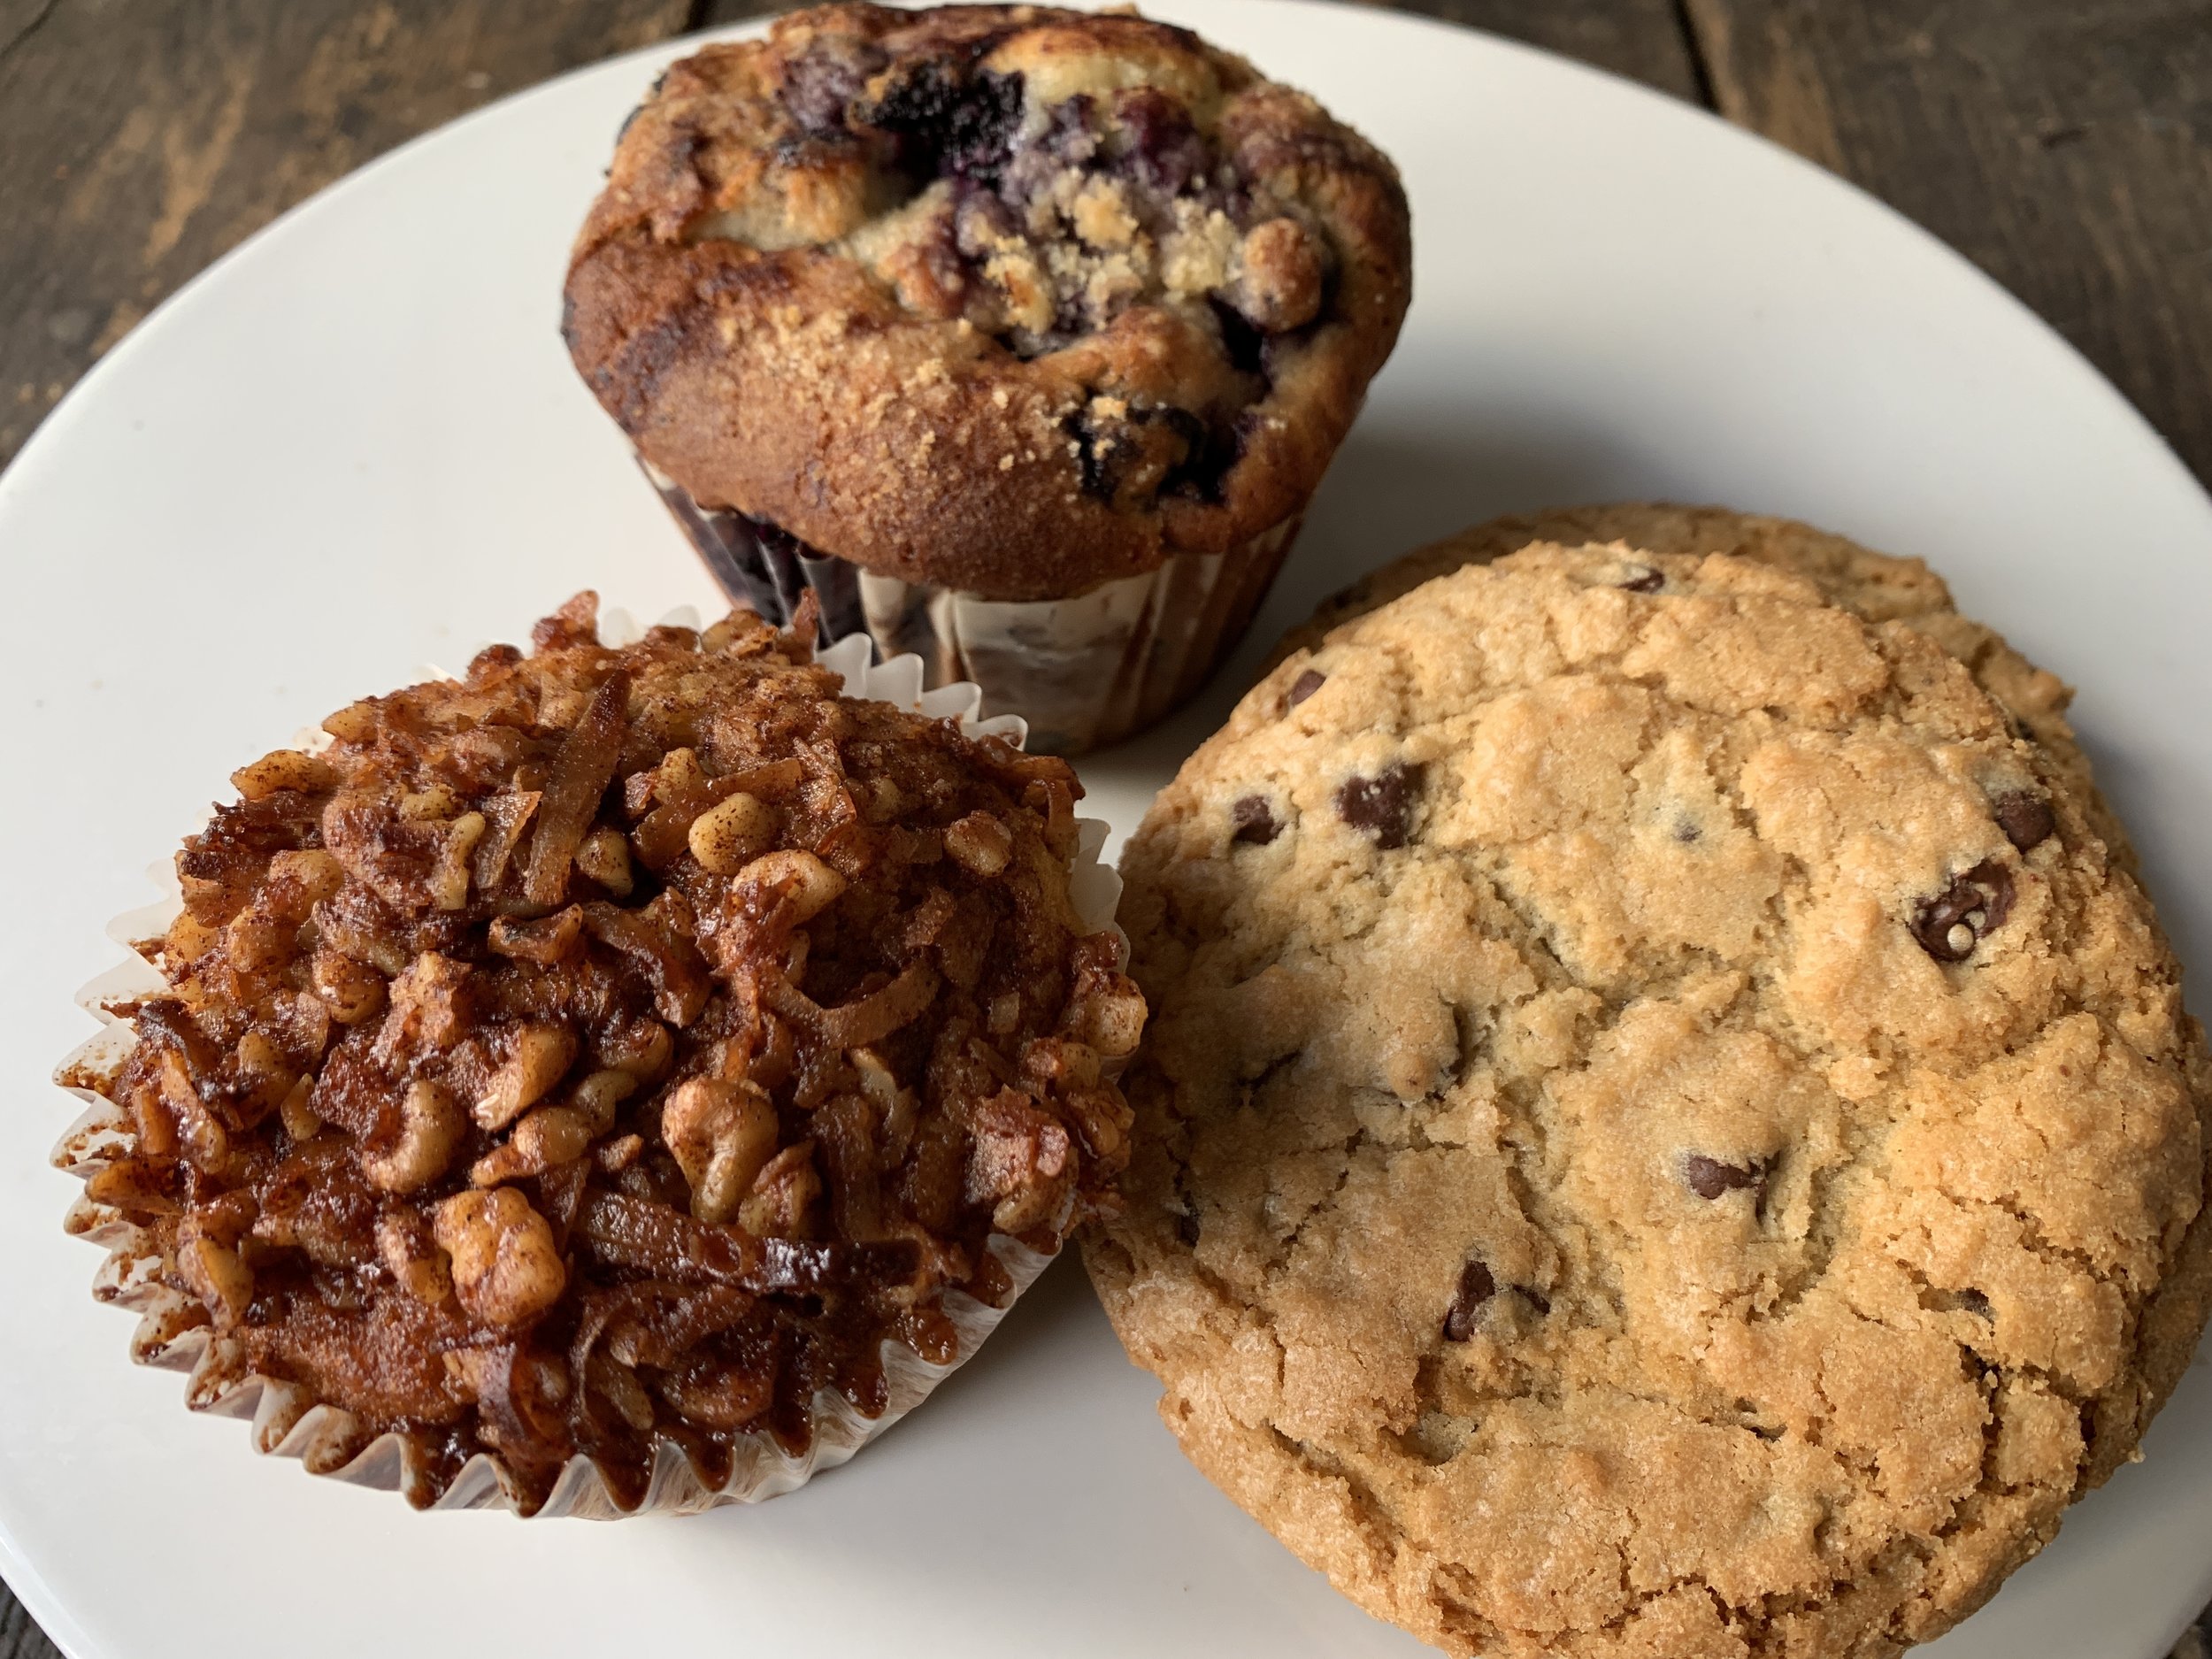 The best cookies and muffins around w/ the awards &amp; accolades to prove it.